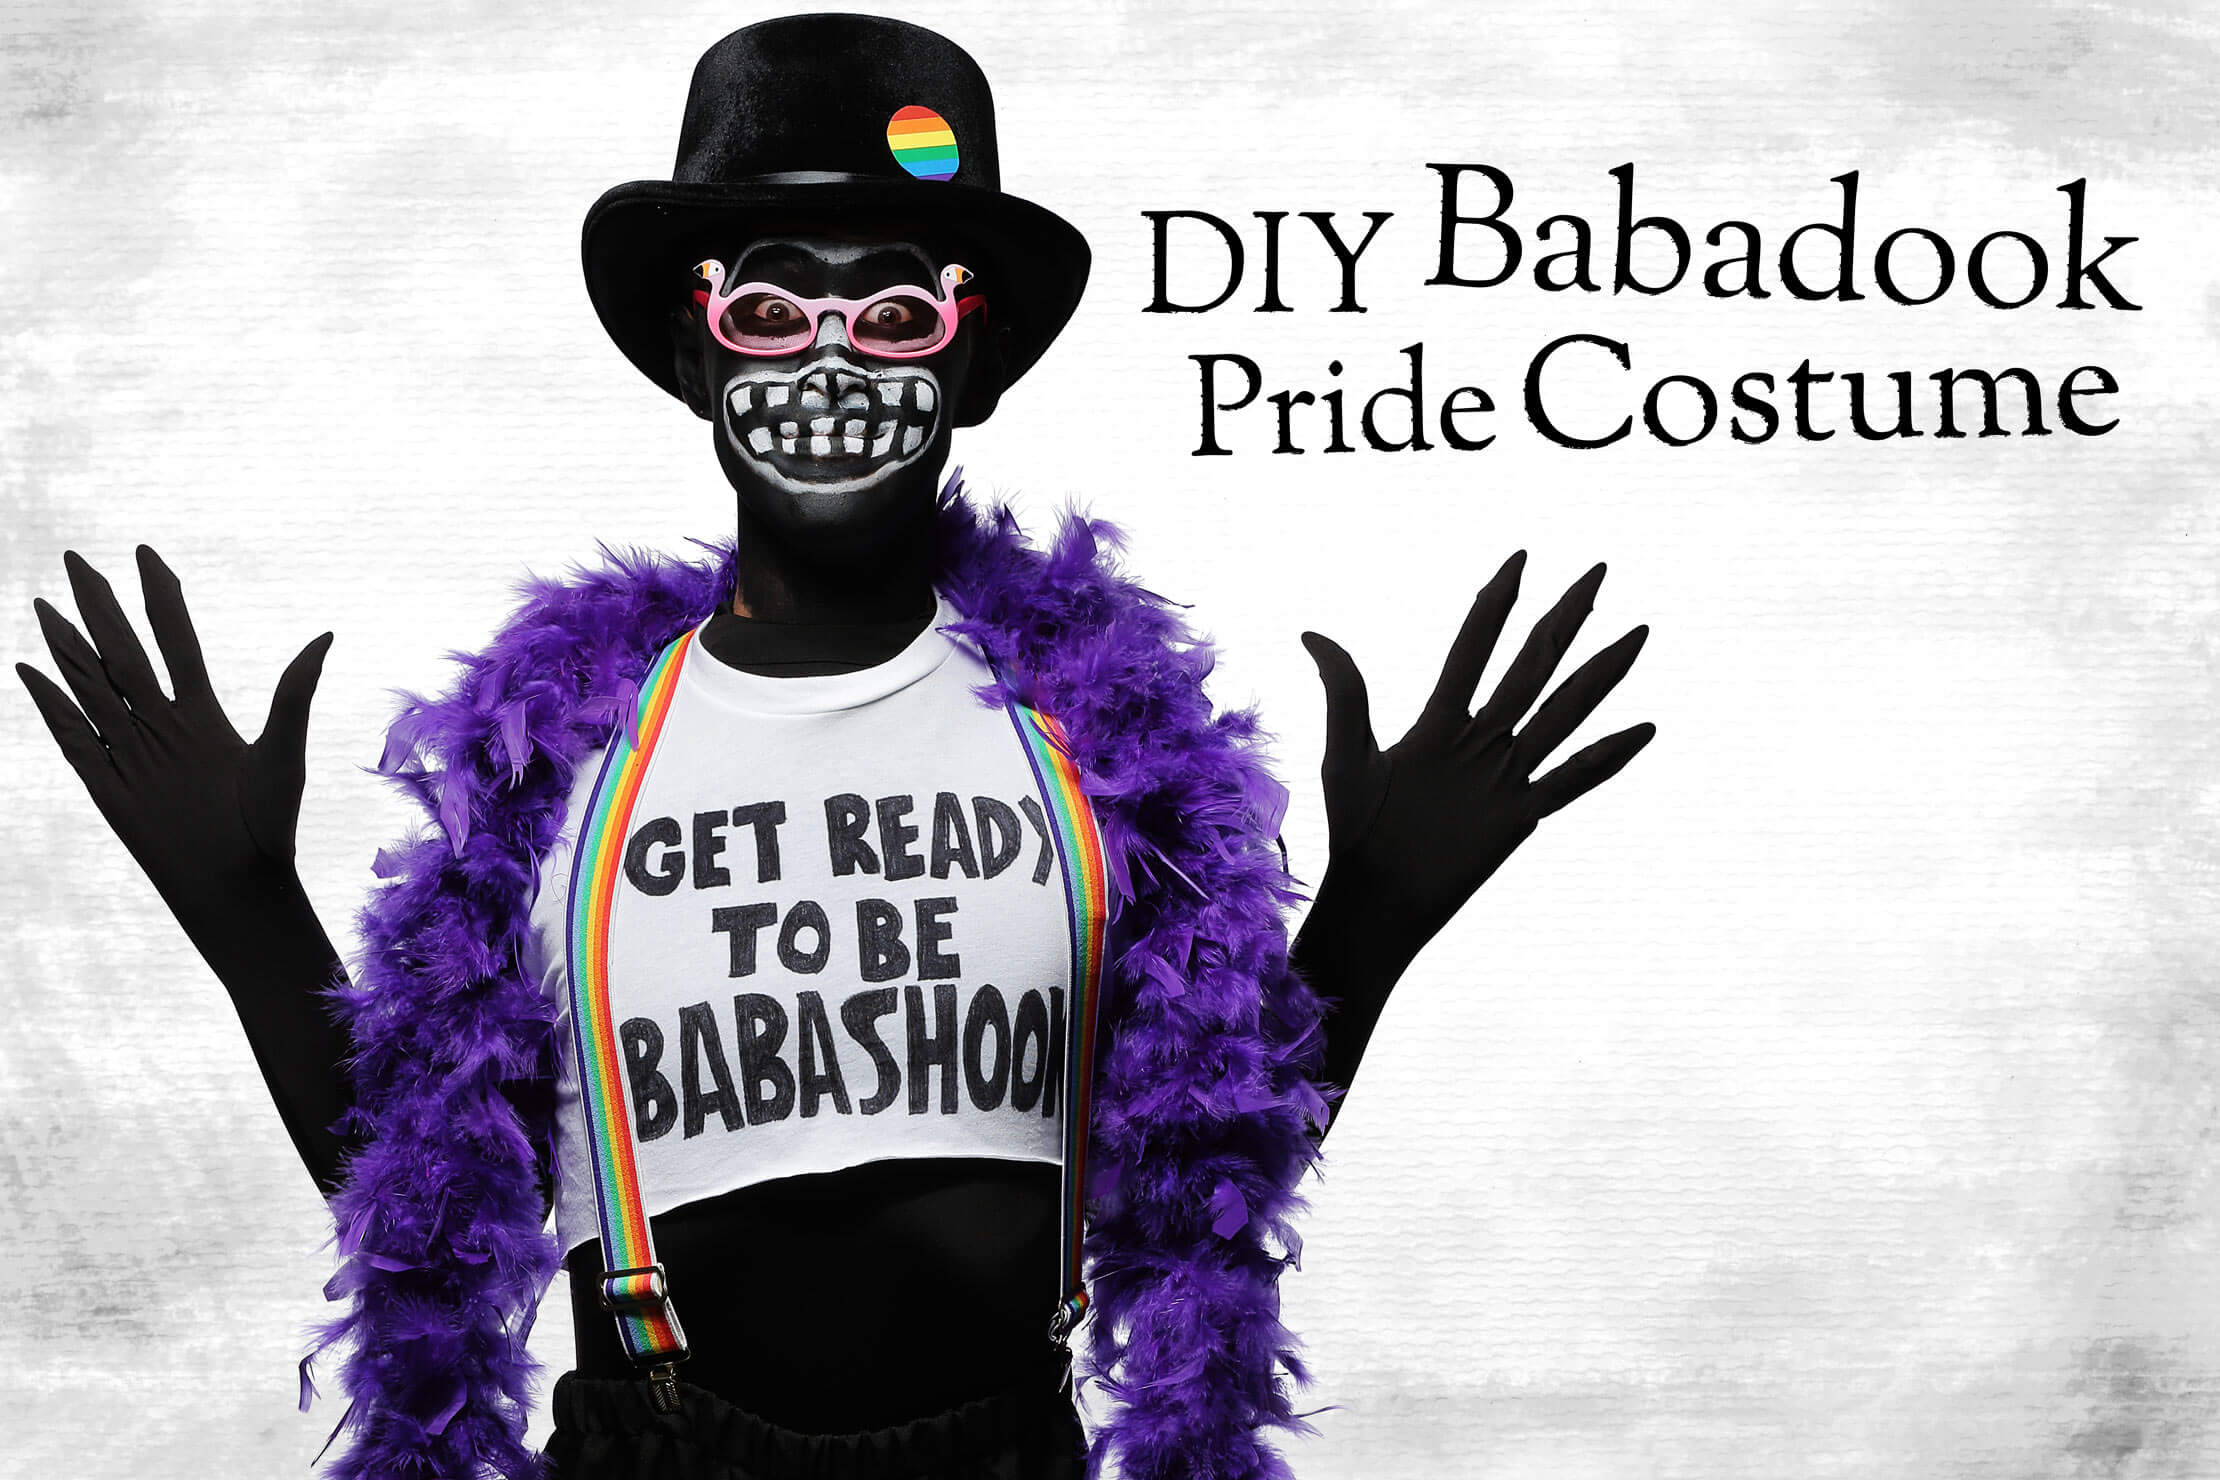 Babadook Meme Costume for Pride